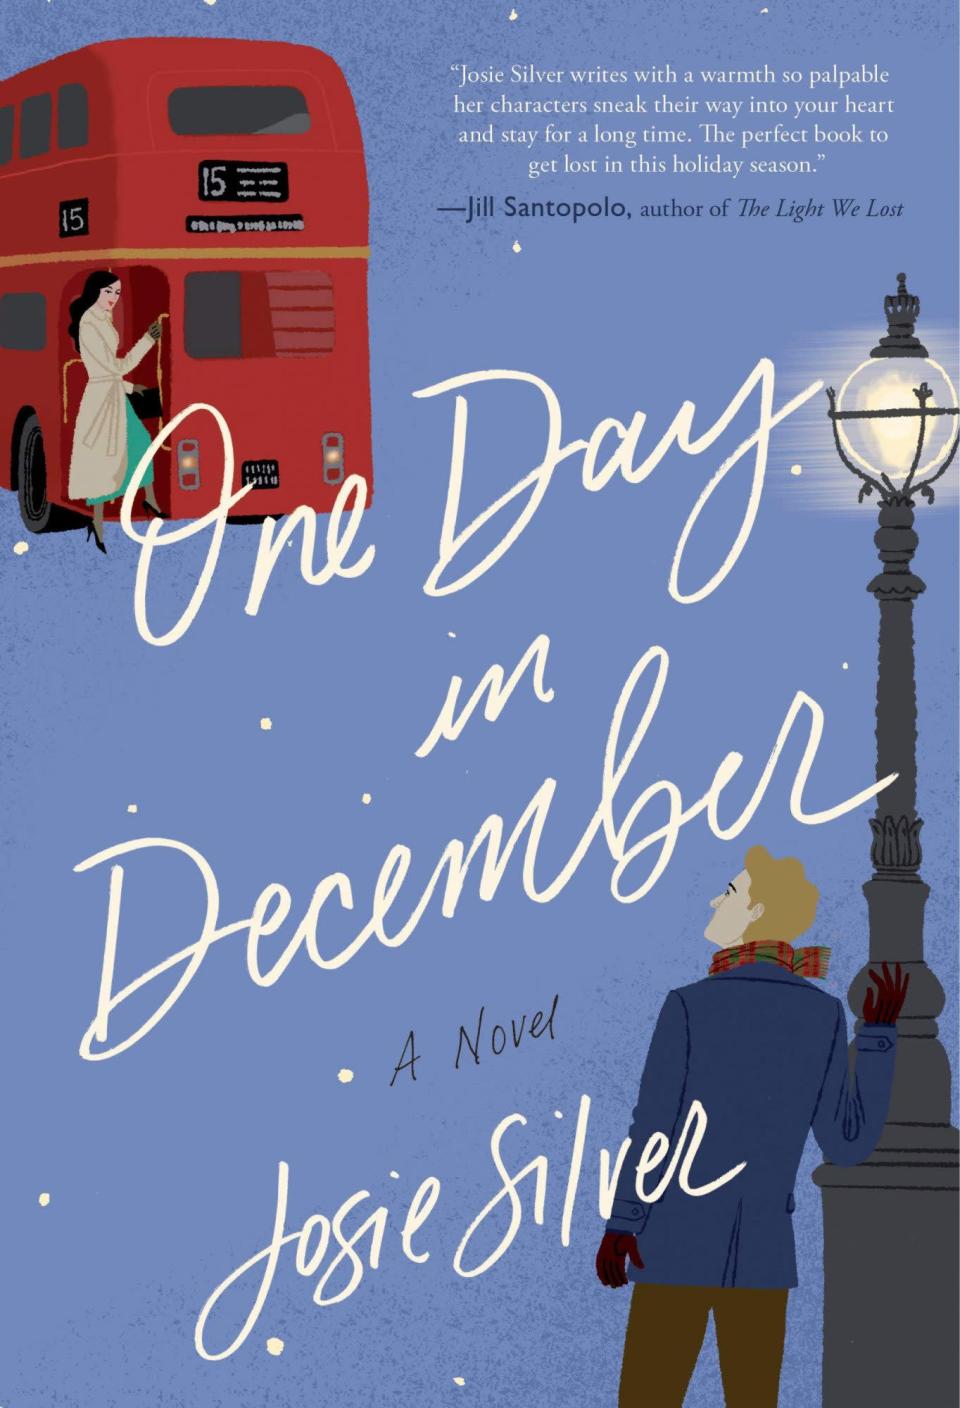 <p>Friendship and true love are at the heart of Josie Silver's much-loved holiday novel <i>One Day in December. </i>It's set in London, where fate has a hand in weaving a years-long journey through friendship and love. <i><br></i></p>